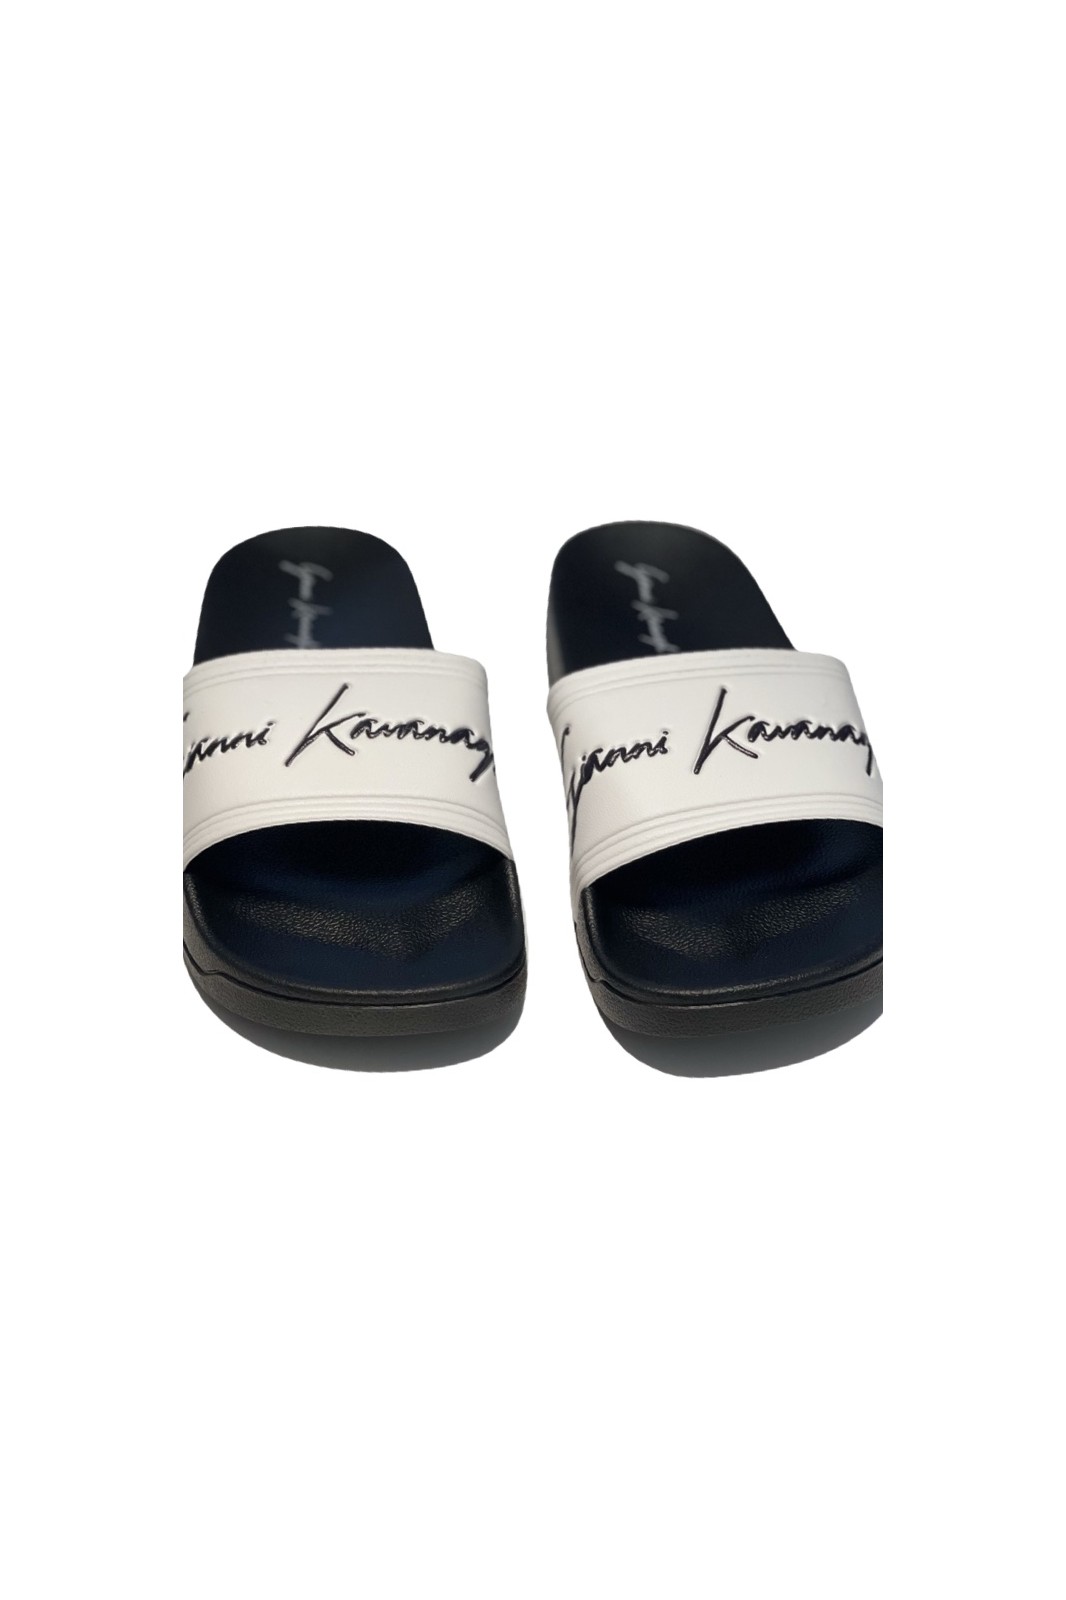 siga adelante gatear Requisitos Chanclas Gianni Kavanagh with Signature Black and White